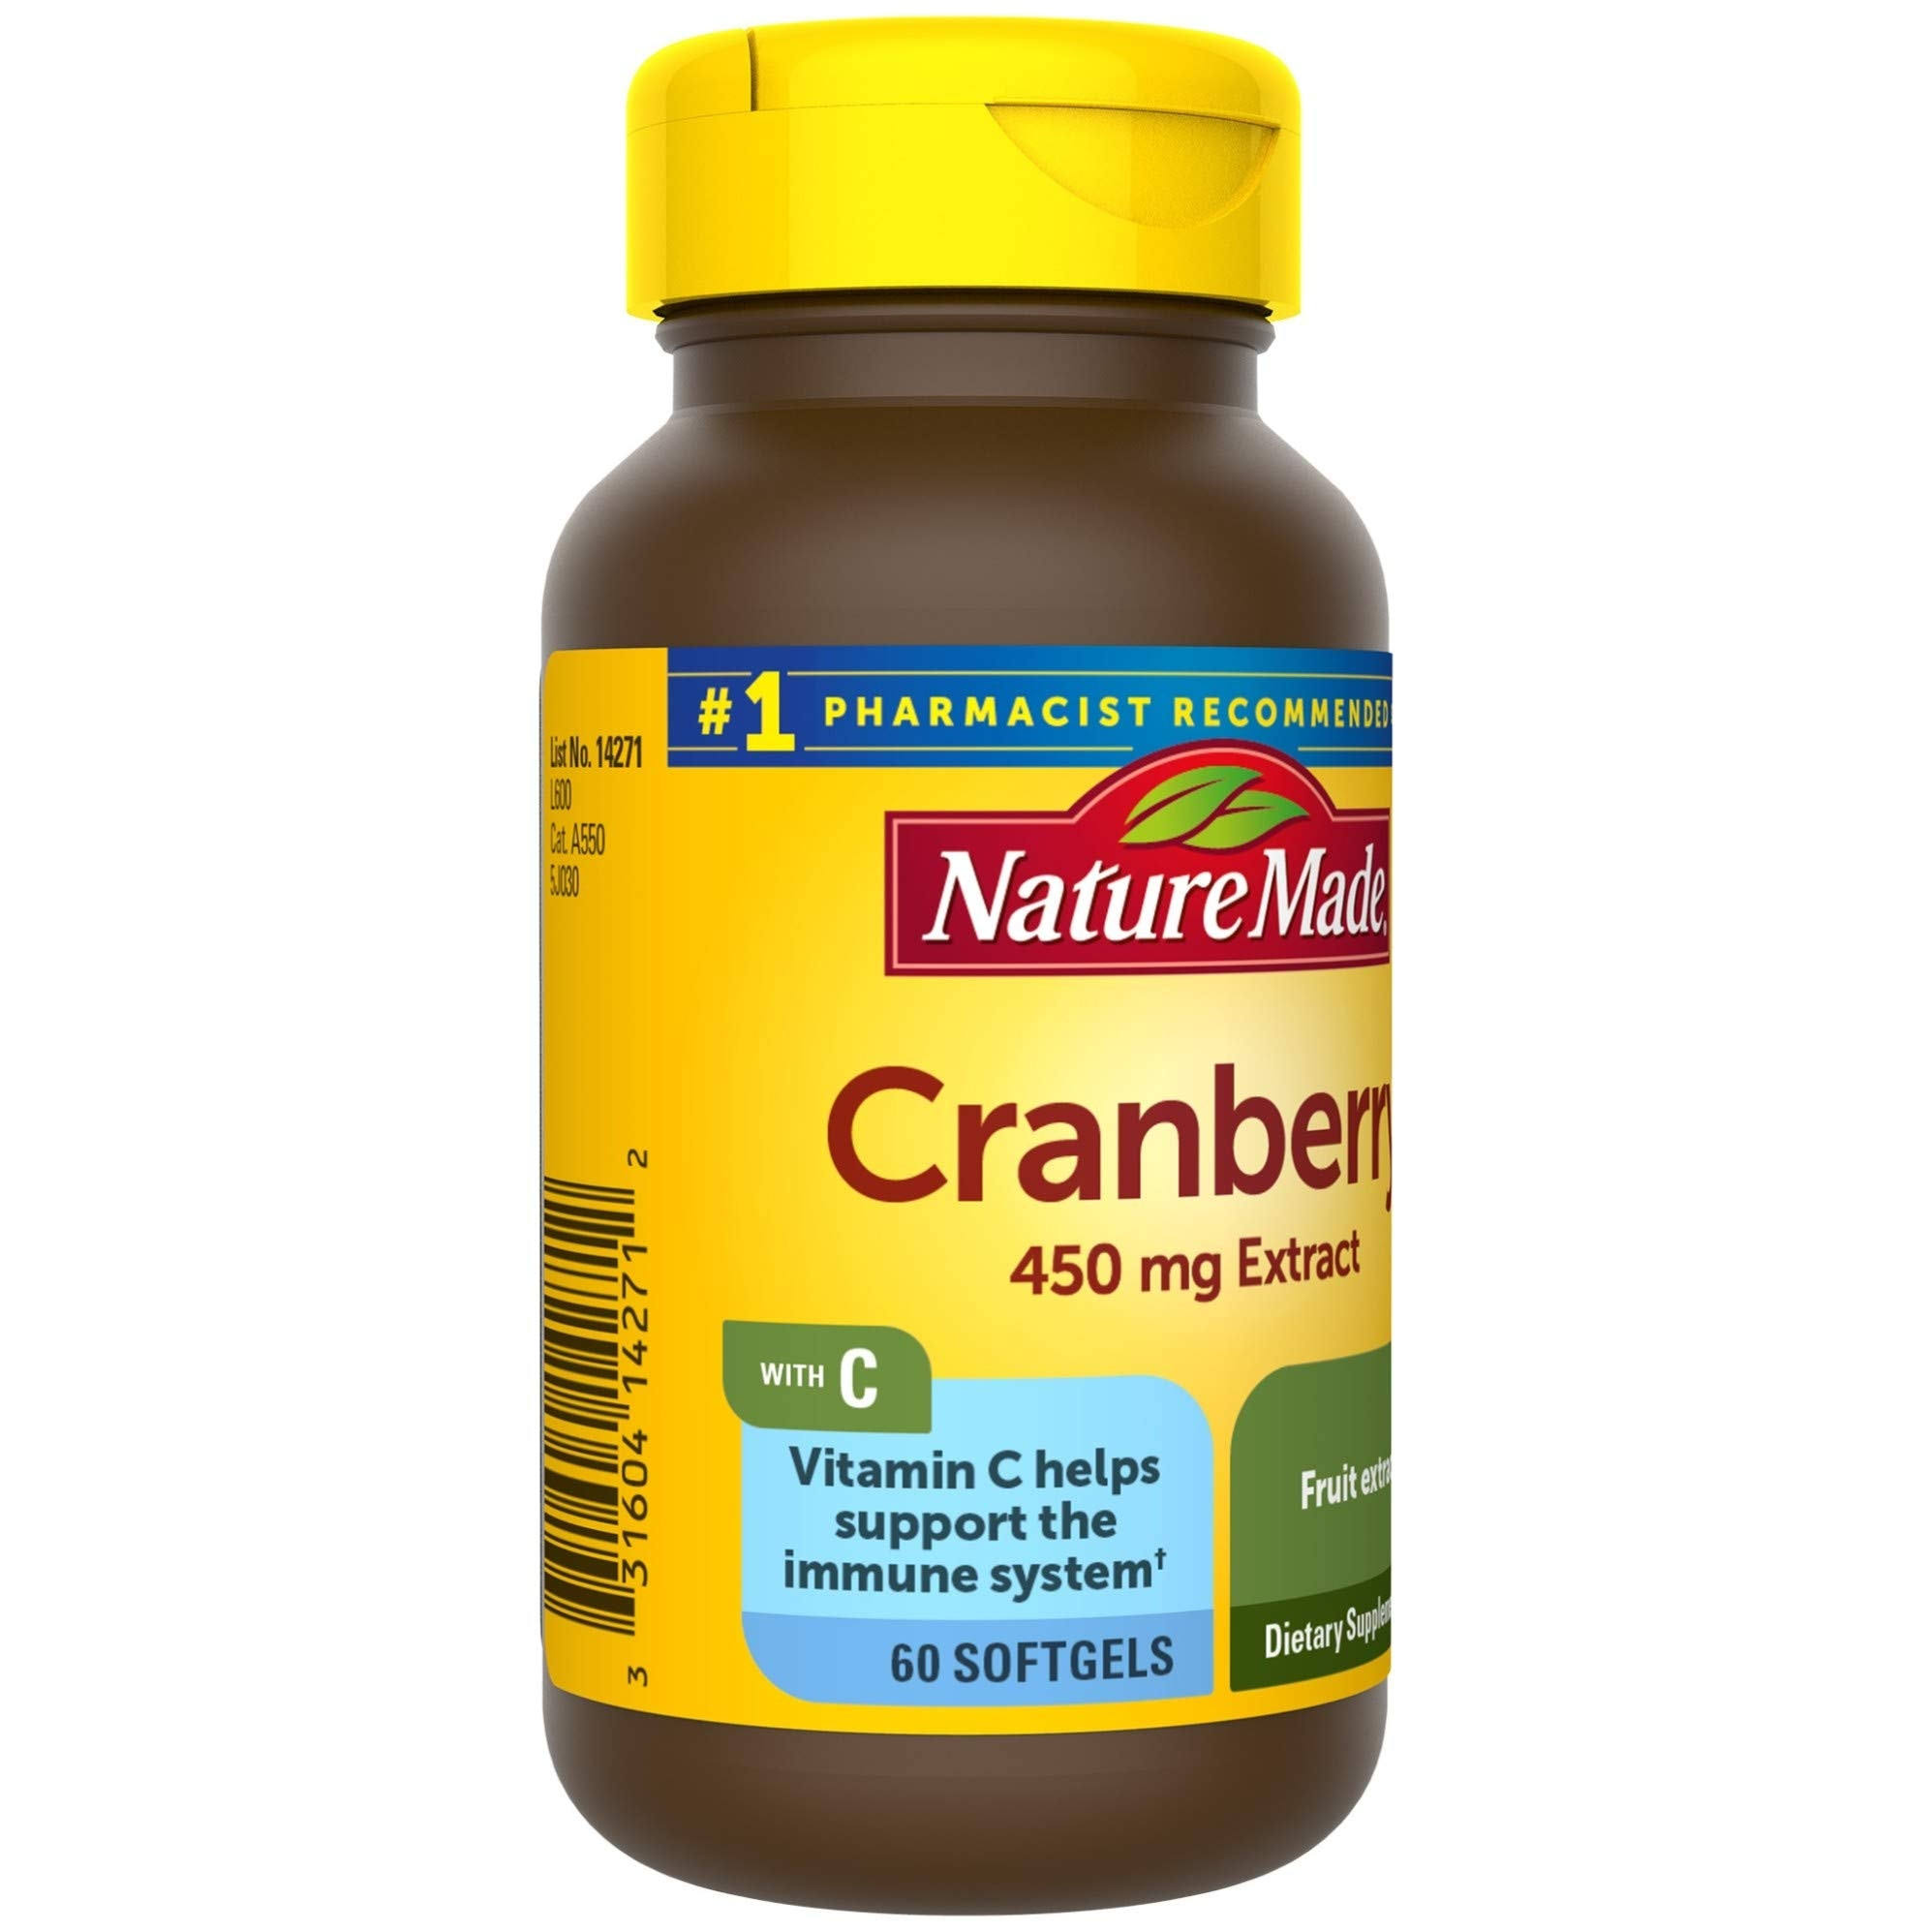 Nature Made Super Strength Cranberry Extract Supplement - 450mg, 60 Softgels